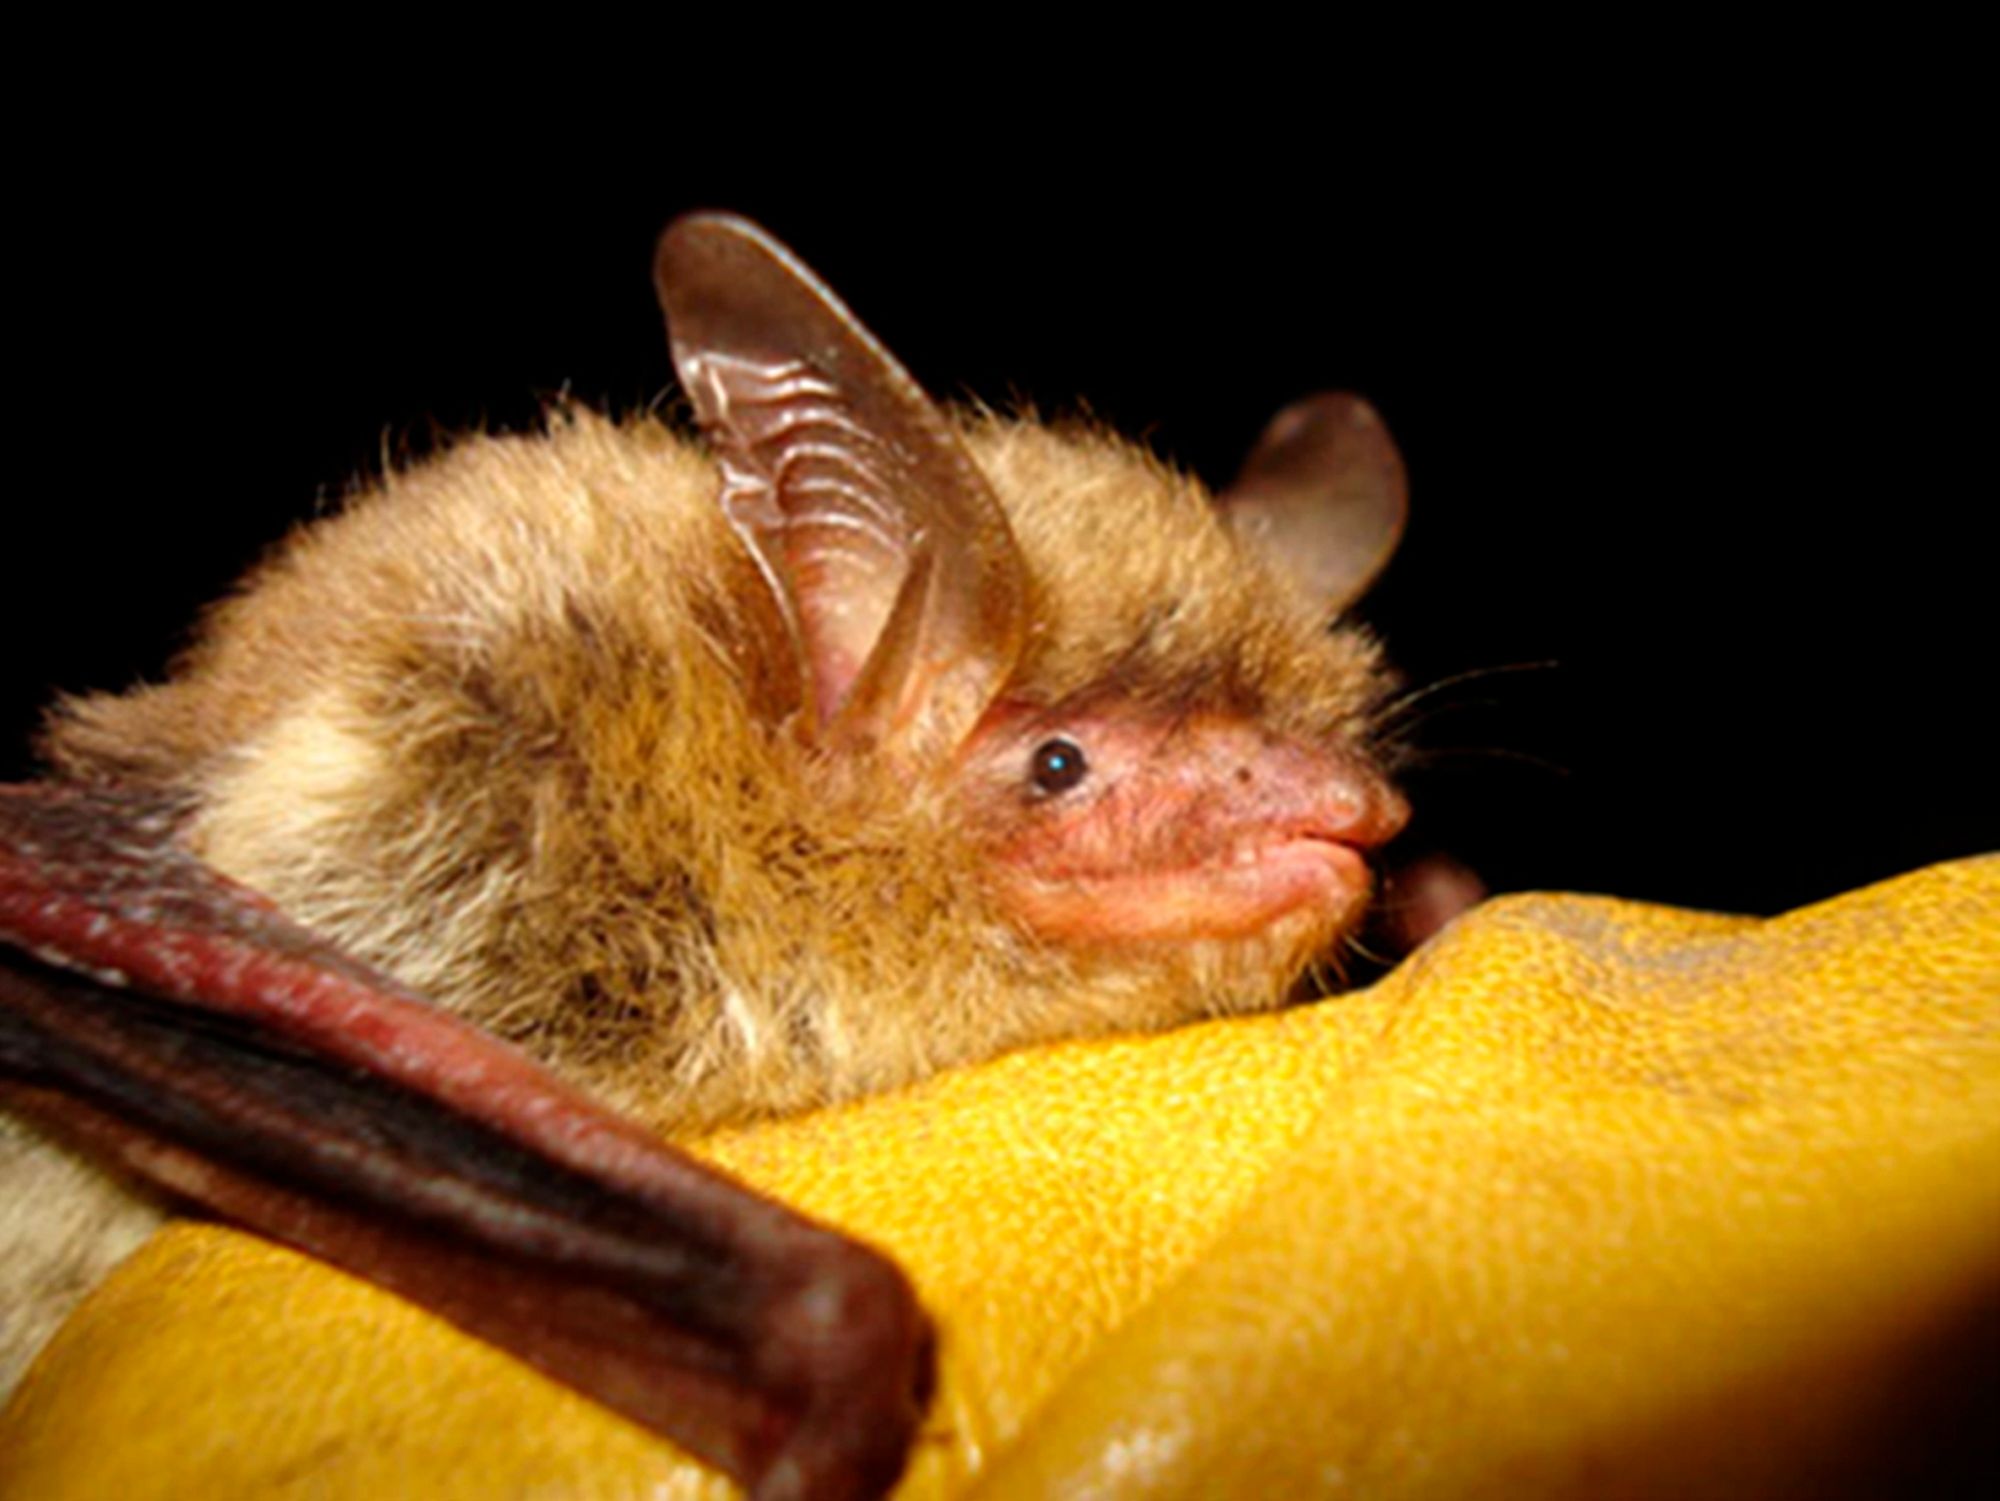 What is Northern long-eared bat? The species proposed for endangered listing